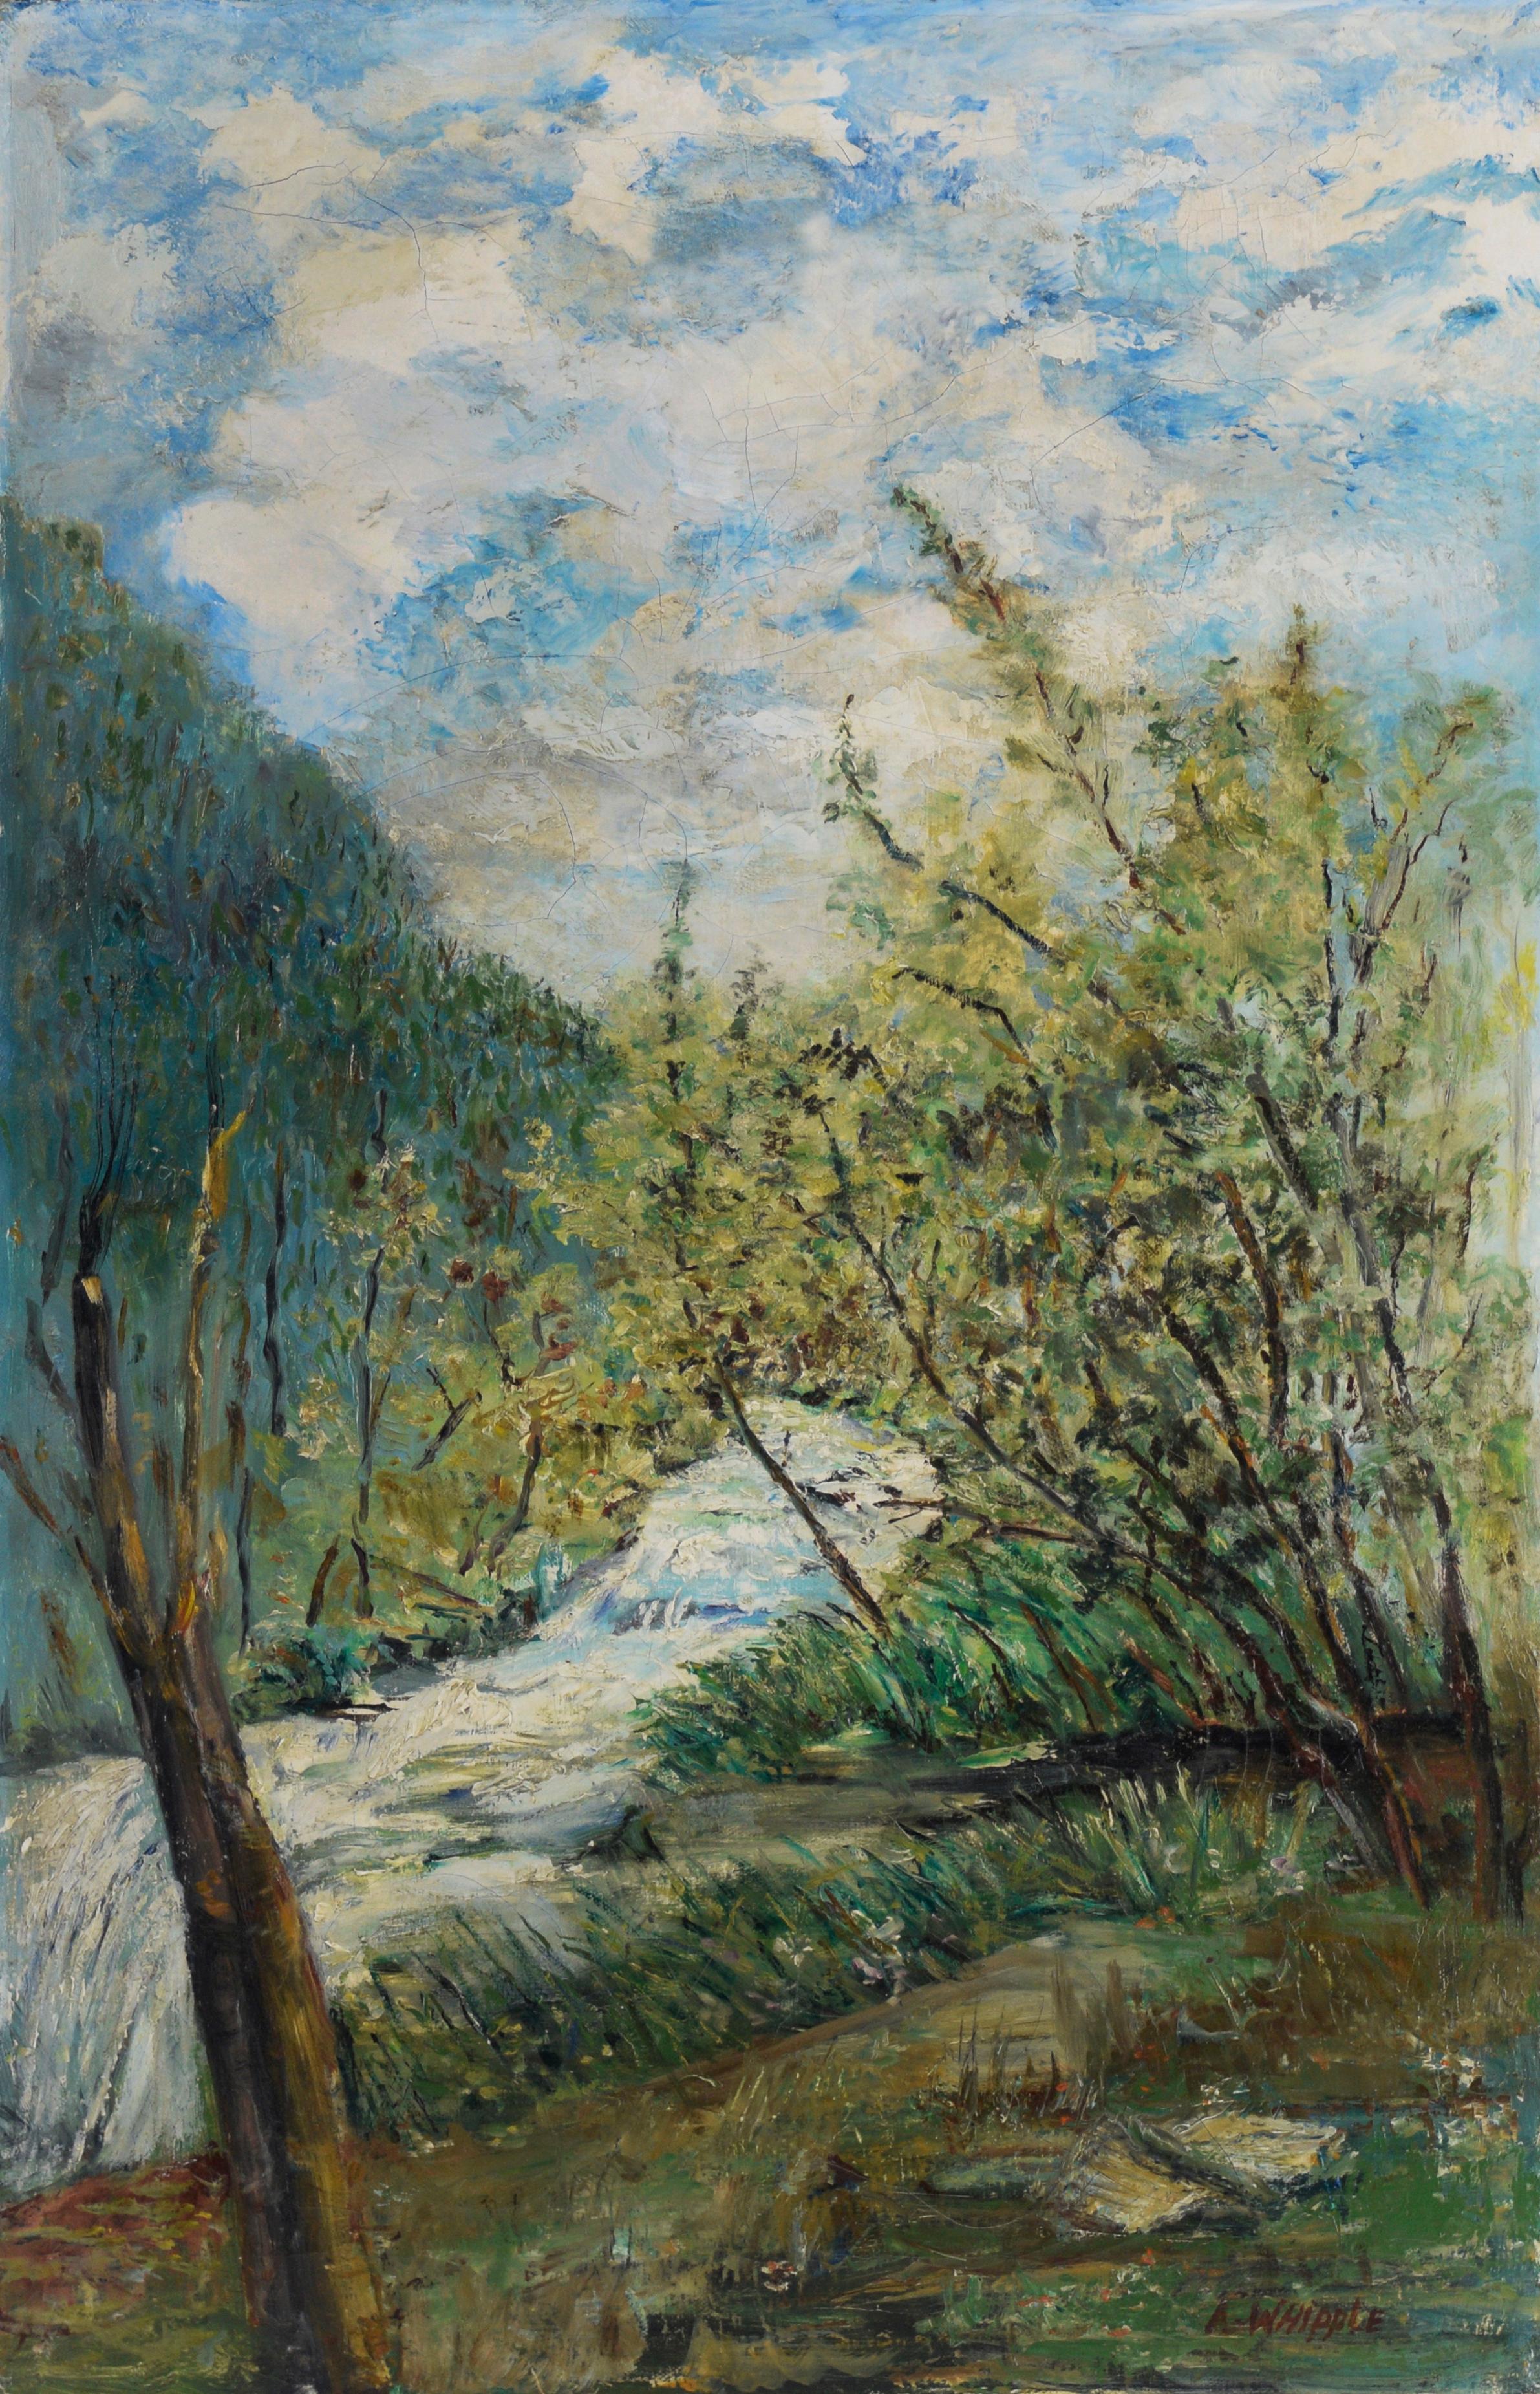 Unknown Landscape Painting - A Quiet River - Oil on Canvas by A. Whipple